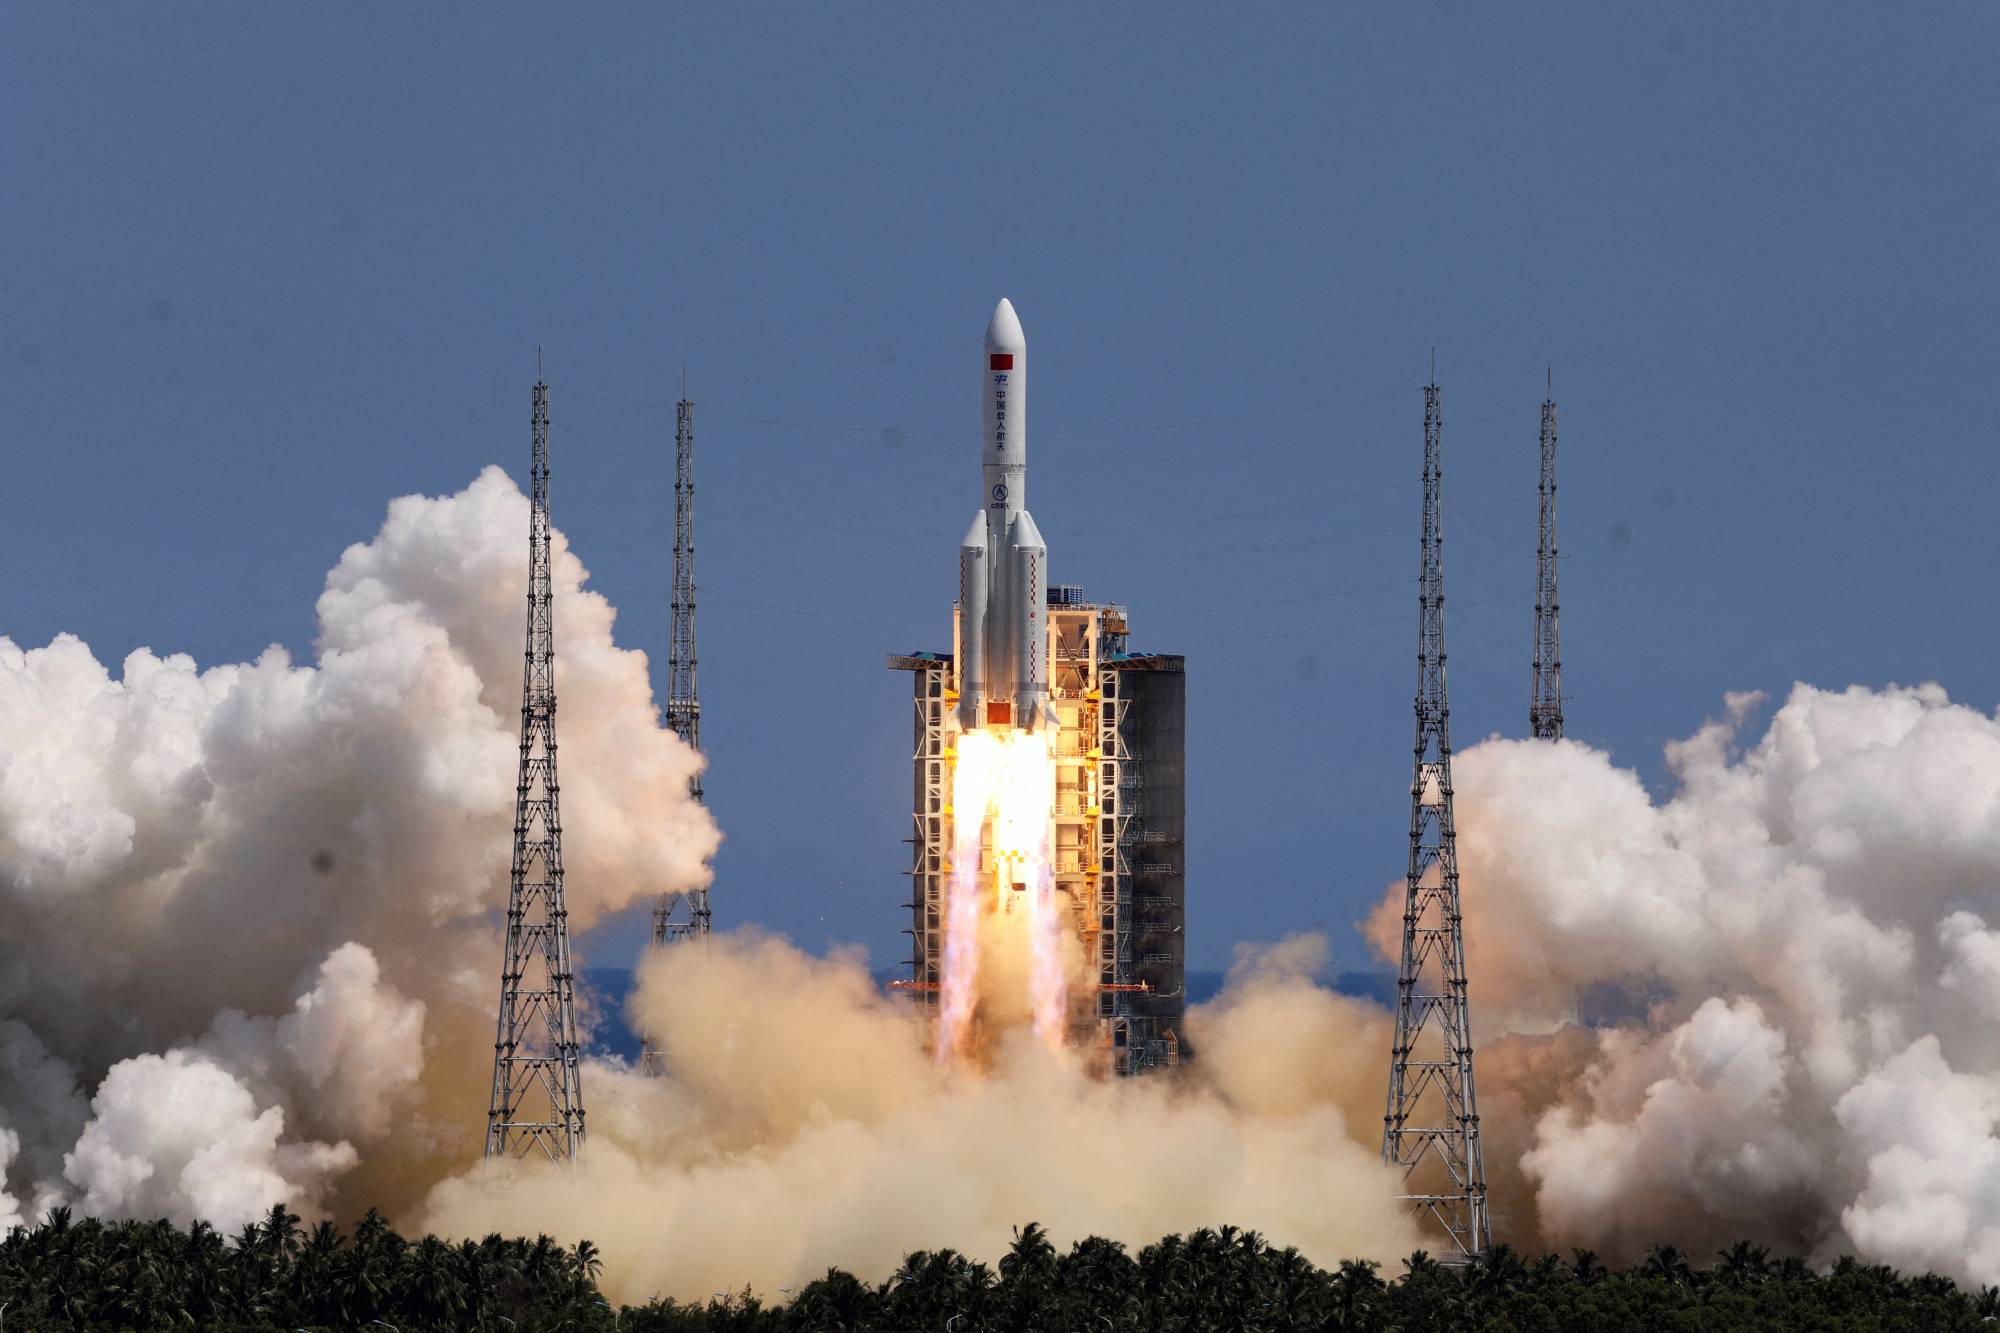 A rocket carrying a lab module for China's space station takes off from Hainan province in July. | CHINA DAILY / VIA REUTERS